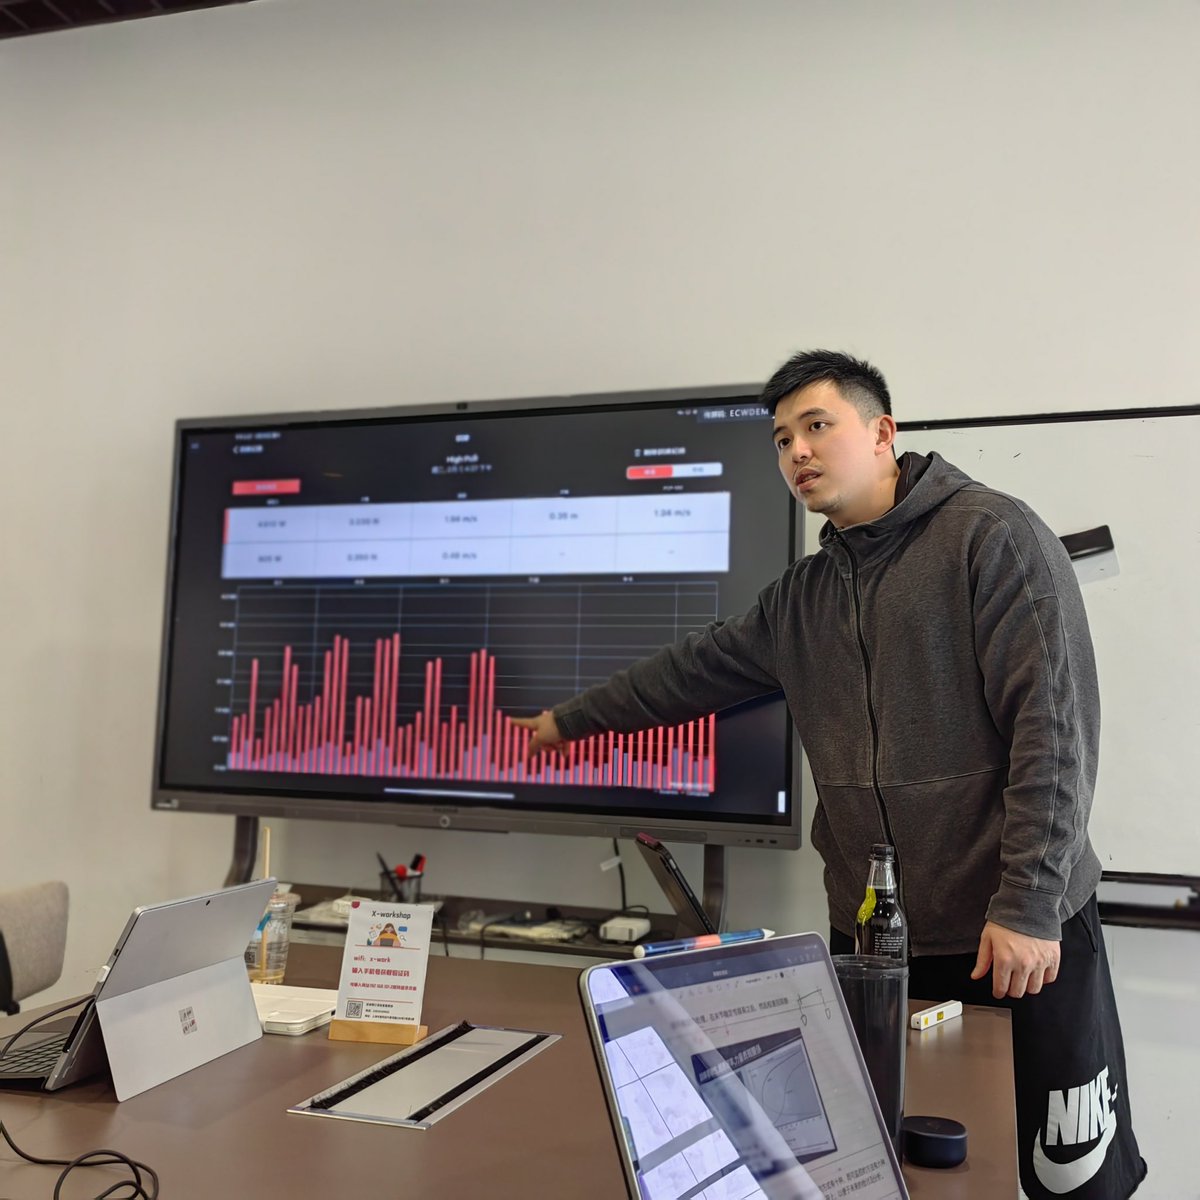 Periodization Theory & Practice workshop starts today! Learn how velocity monitoring & power-based periodization can boost your training efficiency. #PeriodizationTheory #VelocityMonitoring #PowerBasedPeriodization #EfficientTraining